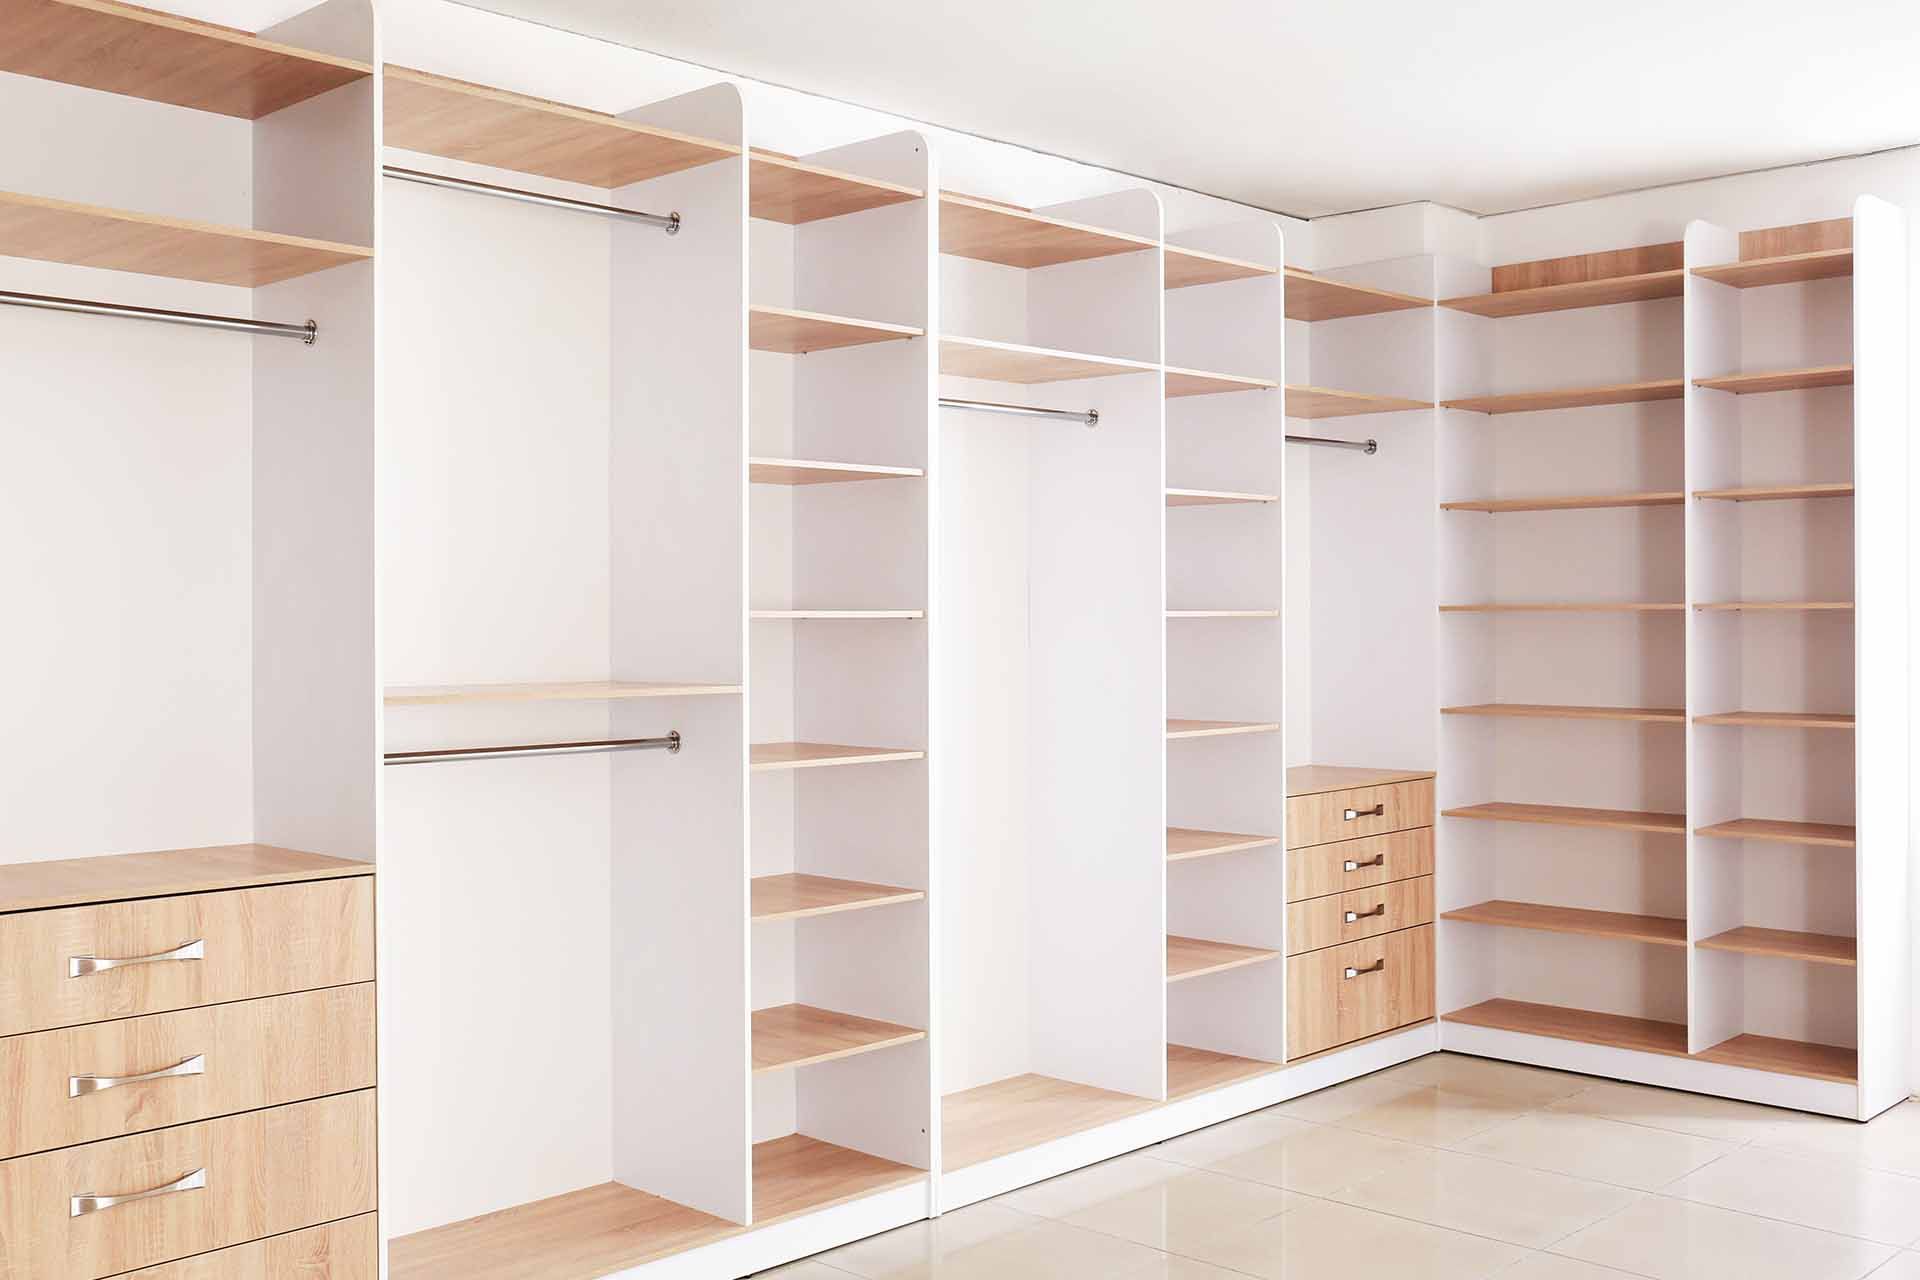 How To Build A Wardrobe – All You Need To Know | Checkatrade Regarding Built In Wardrobes (View 13 of 15)